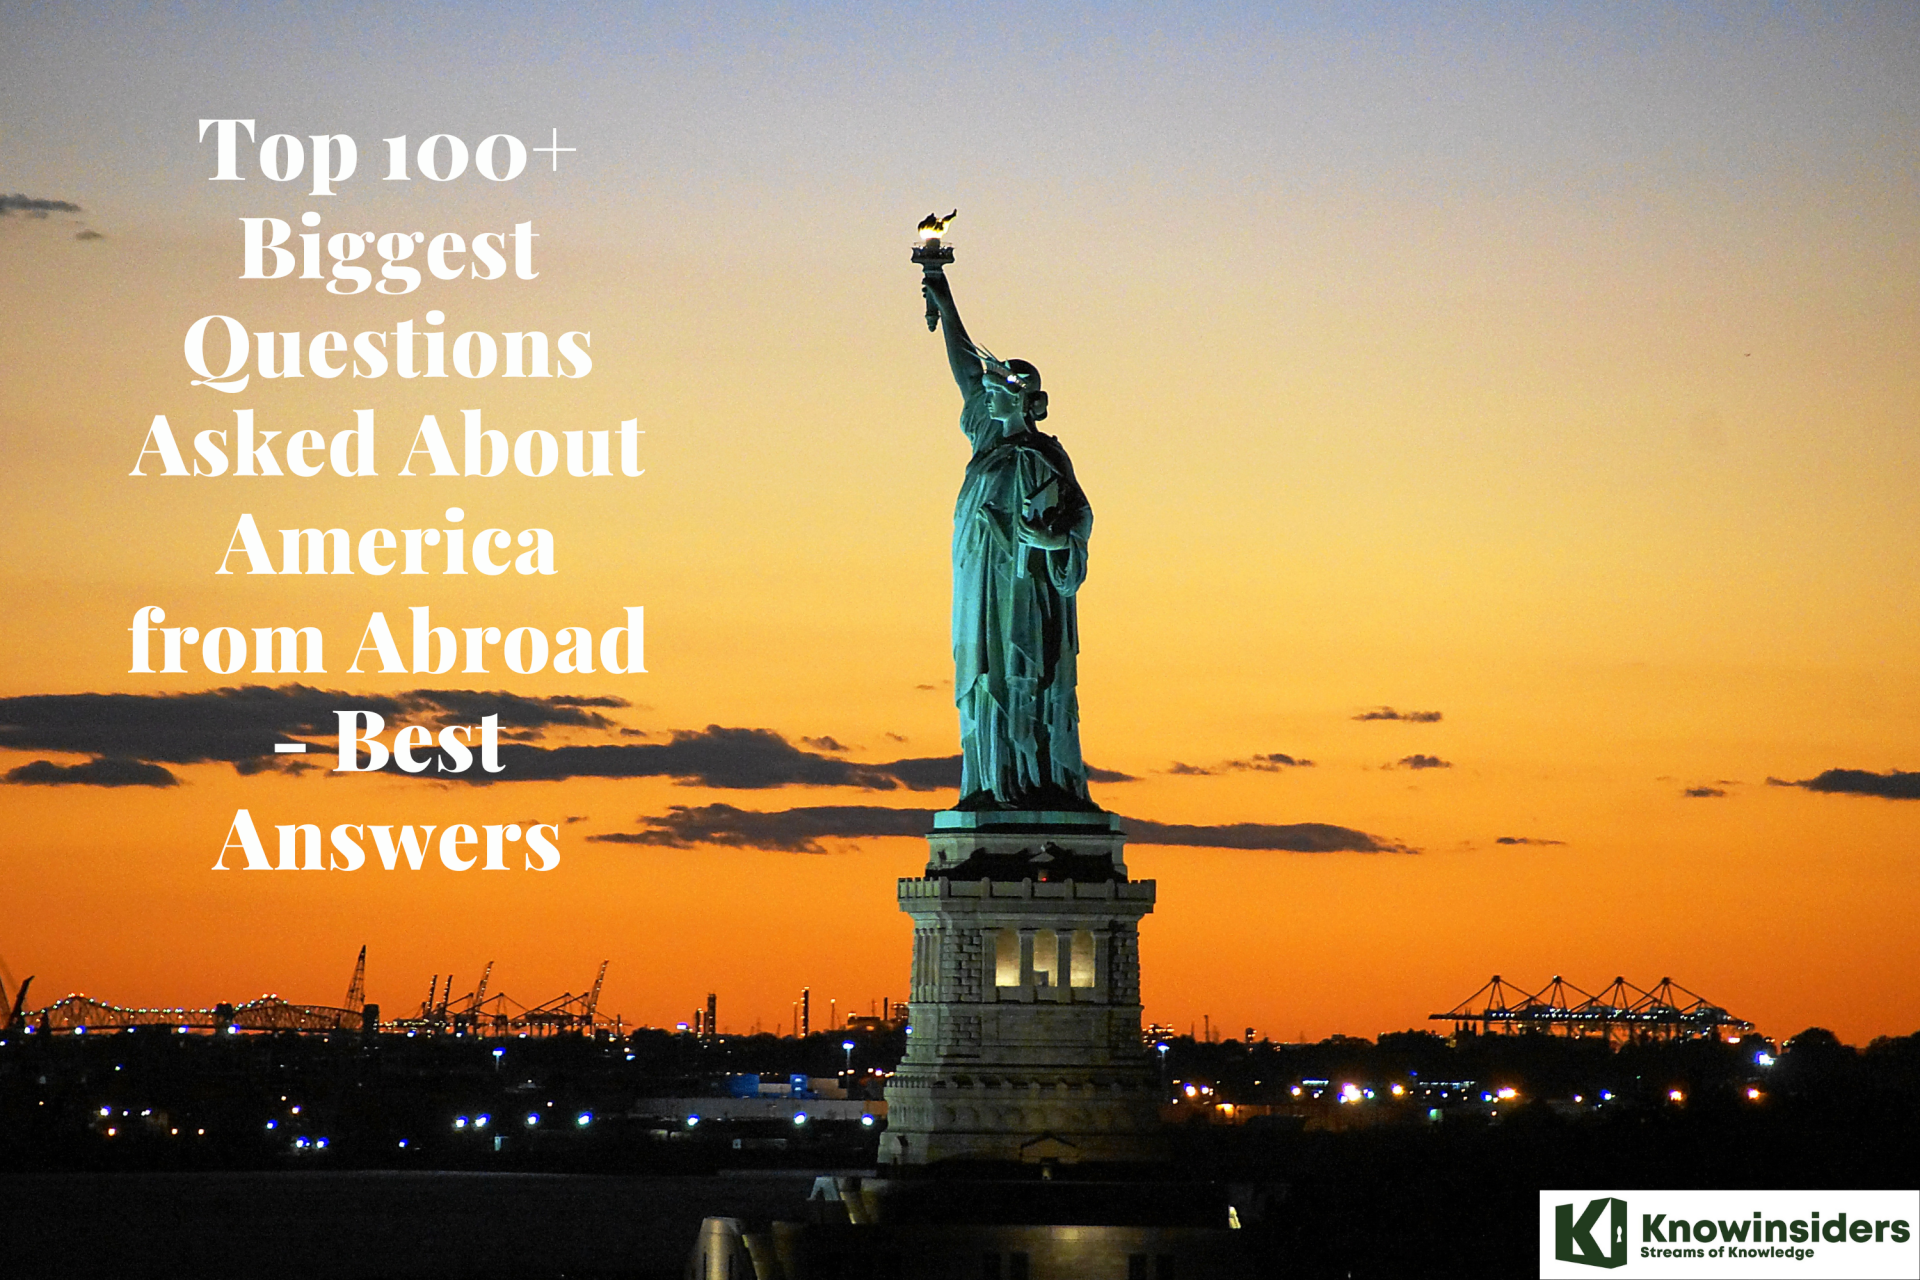 Top 100+ Biggest Questions Asked About America from Abroad - Best Answers